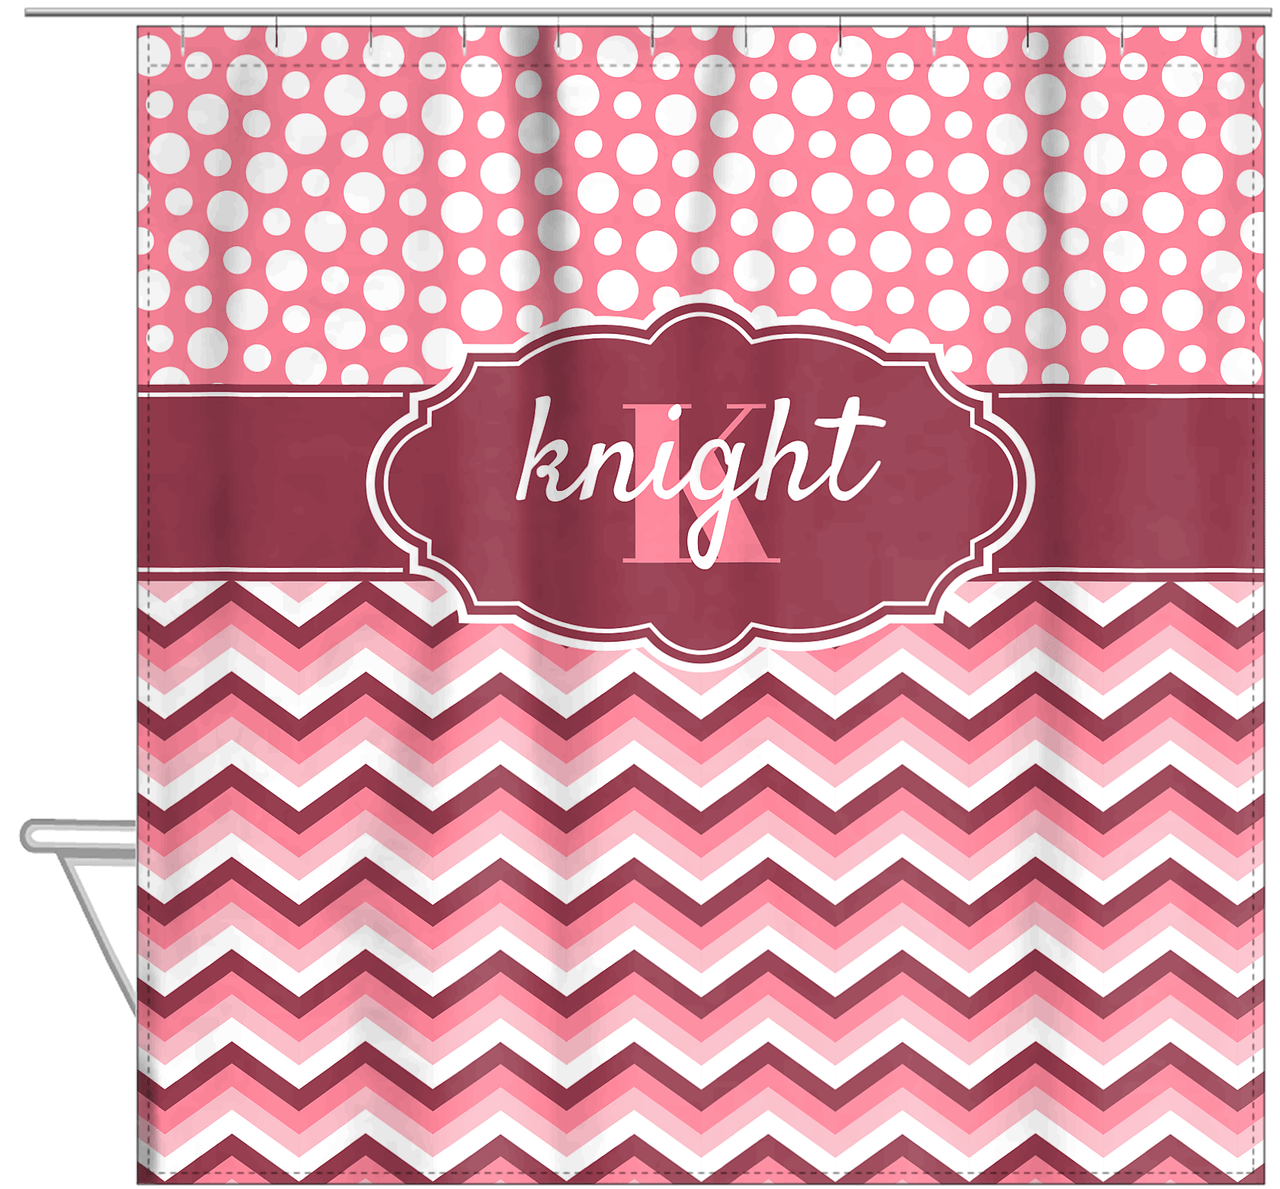 Personalized Polka Dots and Chevron II Shower Curtain - Pink and White - Fancy Nameplate II - Hanging View